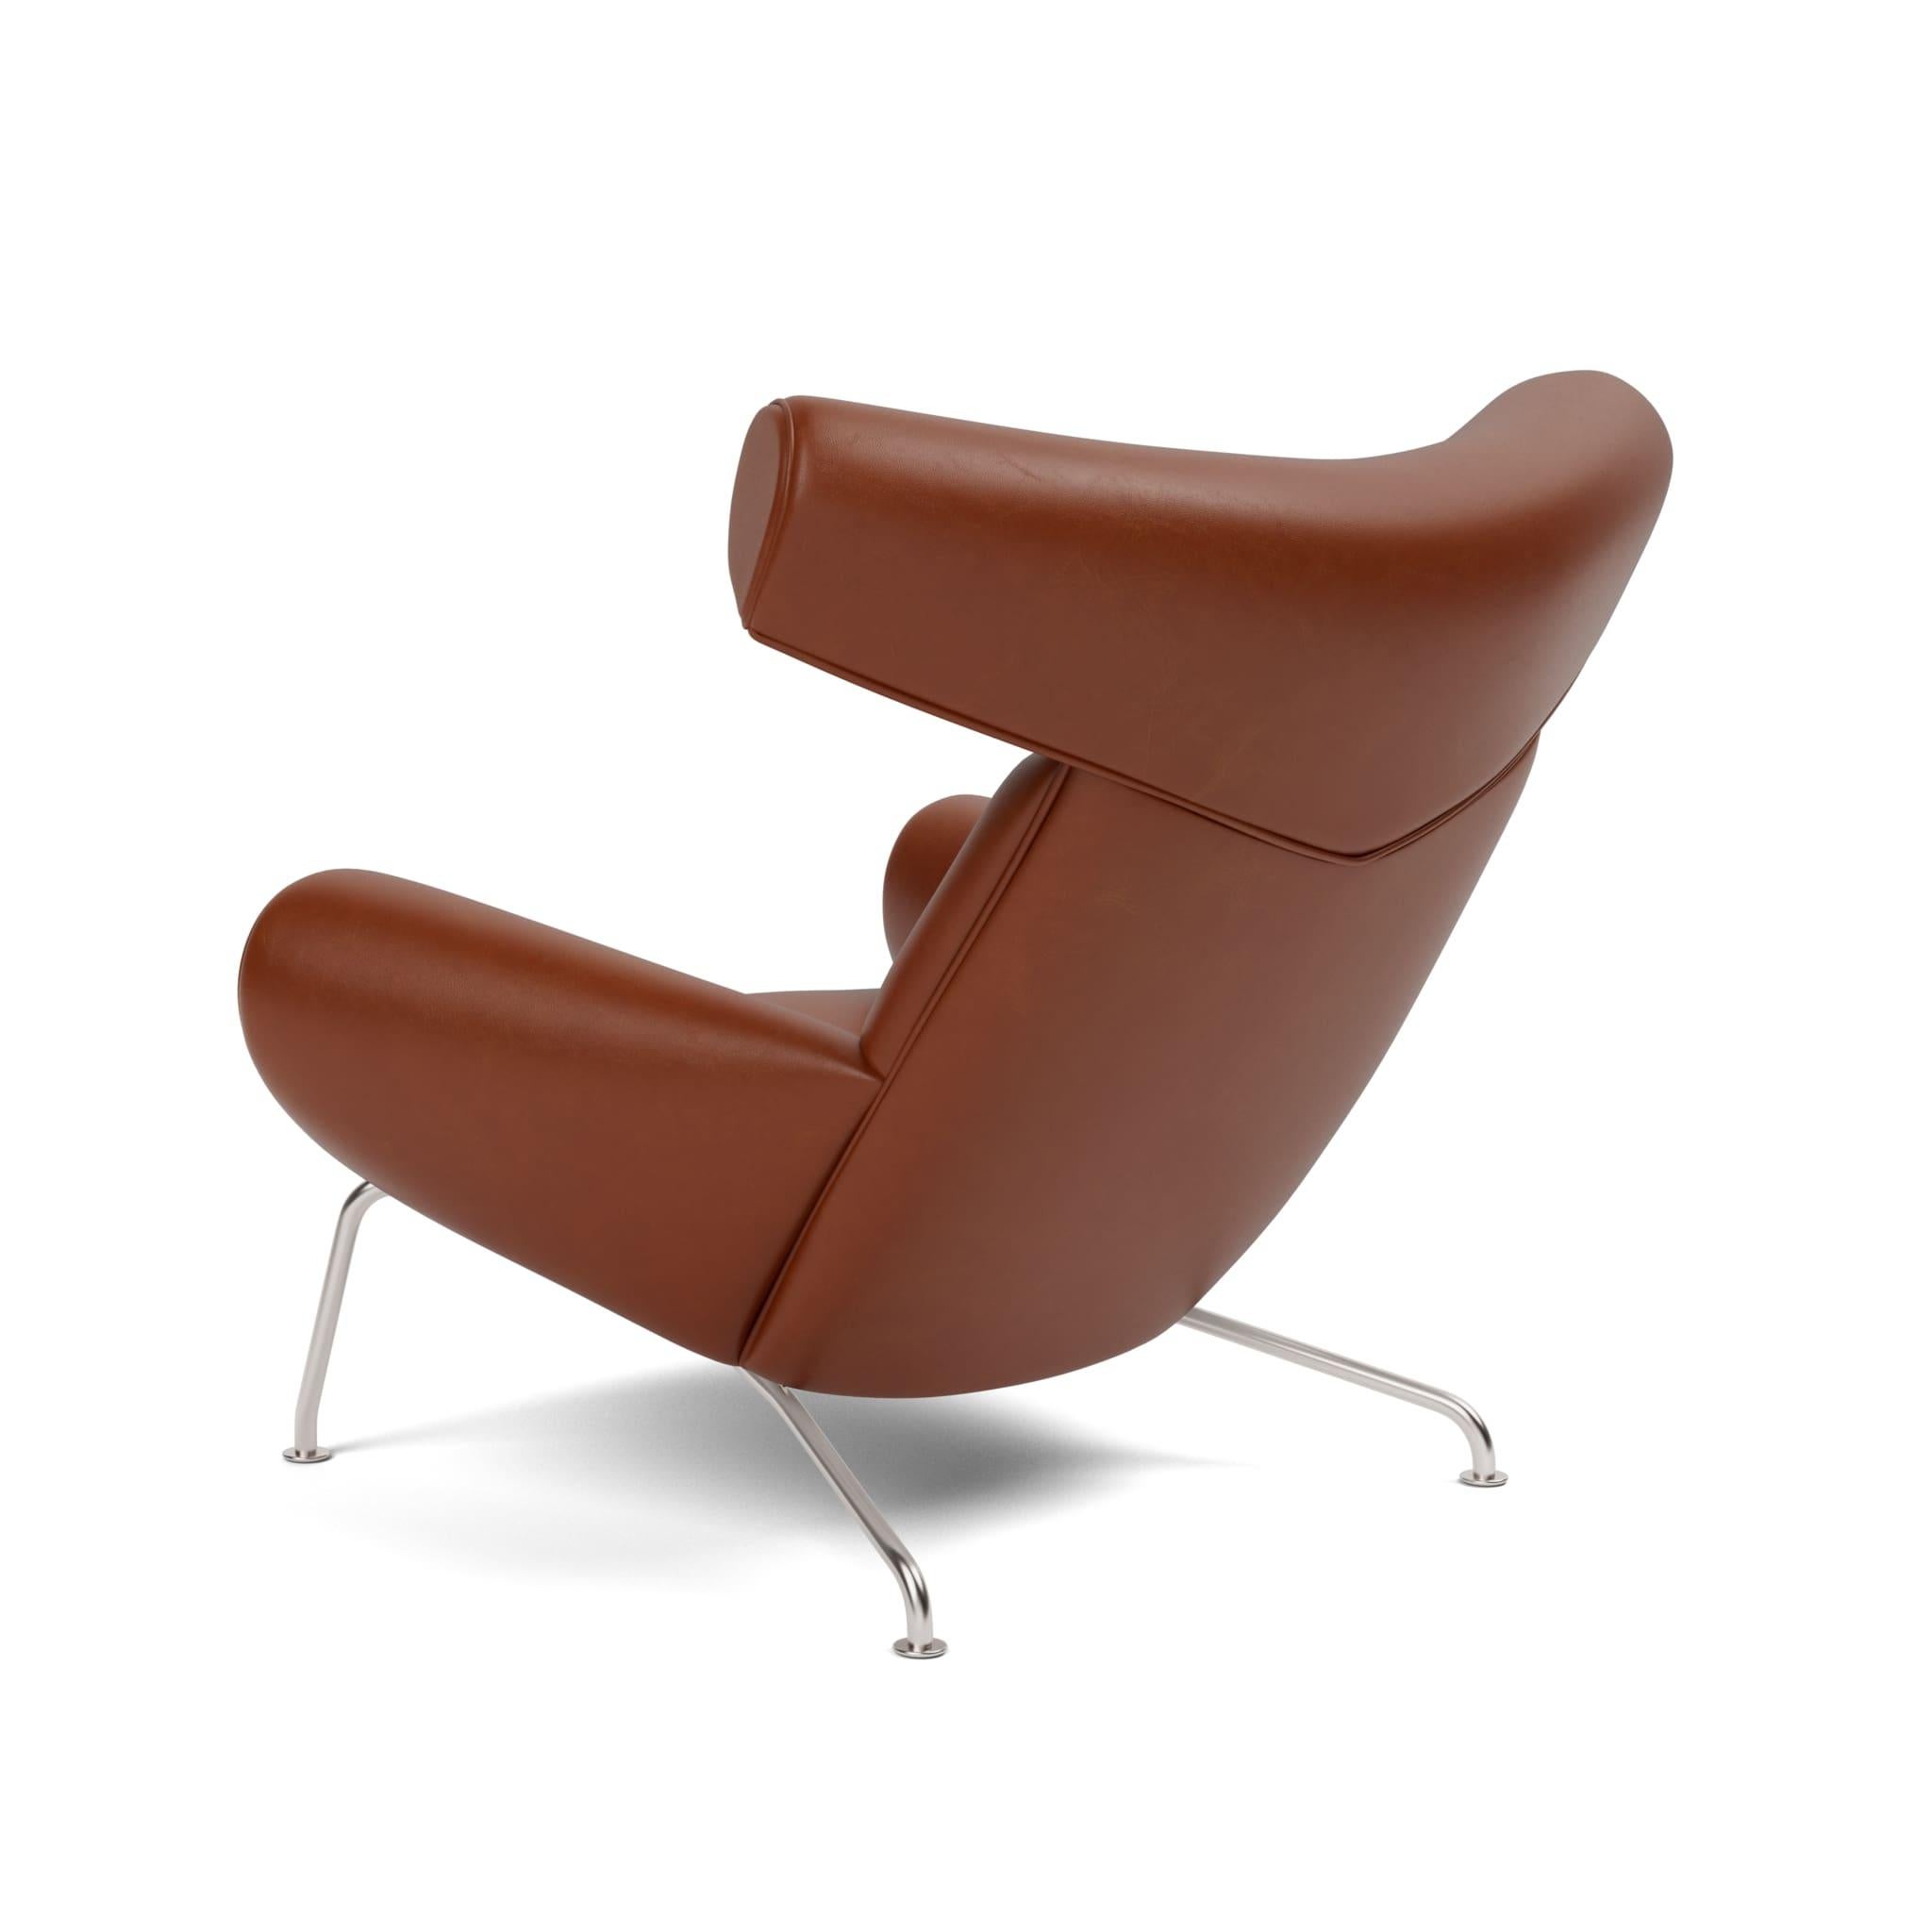 Wegner Ox Chair-Russet Brown/Brushed Stainless Steel-by HansJ. Wegner Fredericia In New Condition For Sale In Dubai, AE